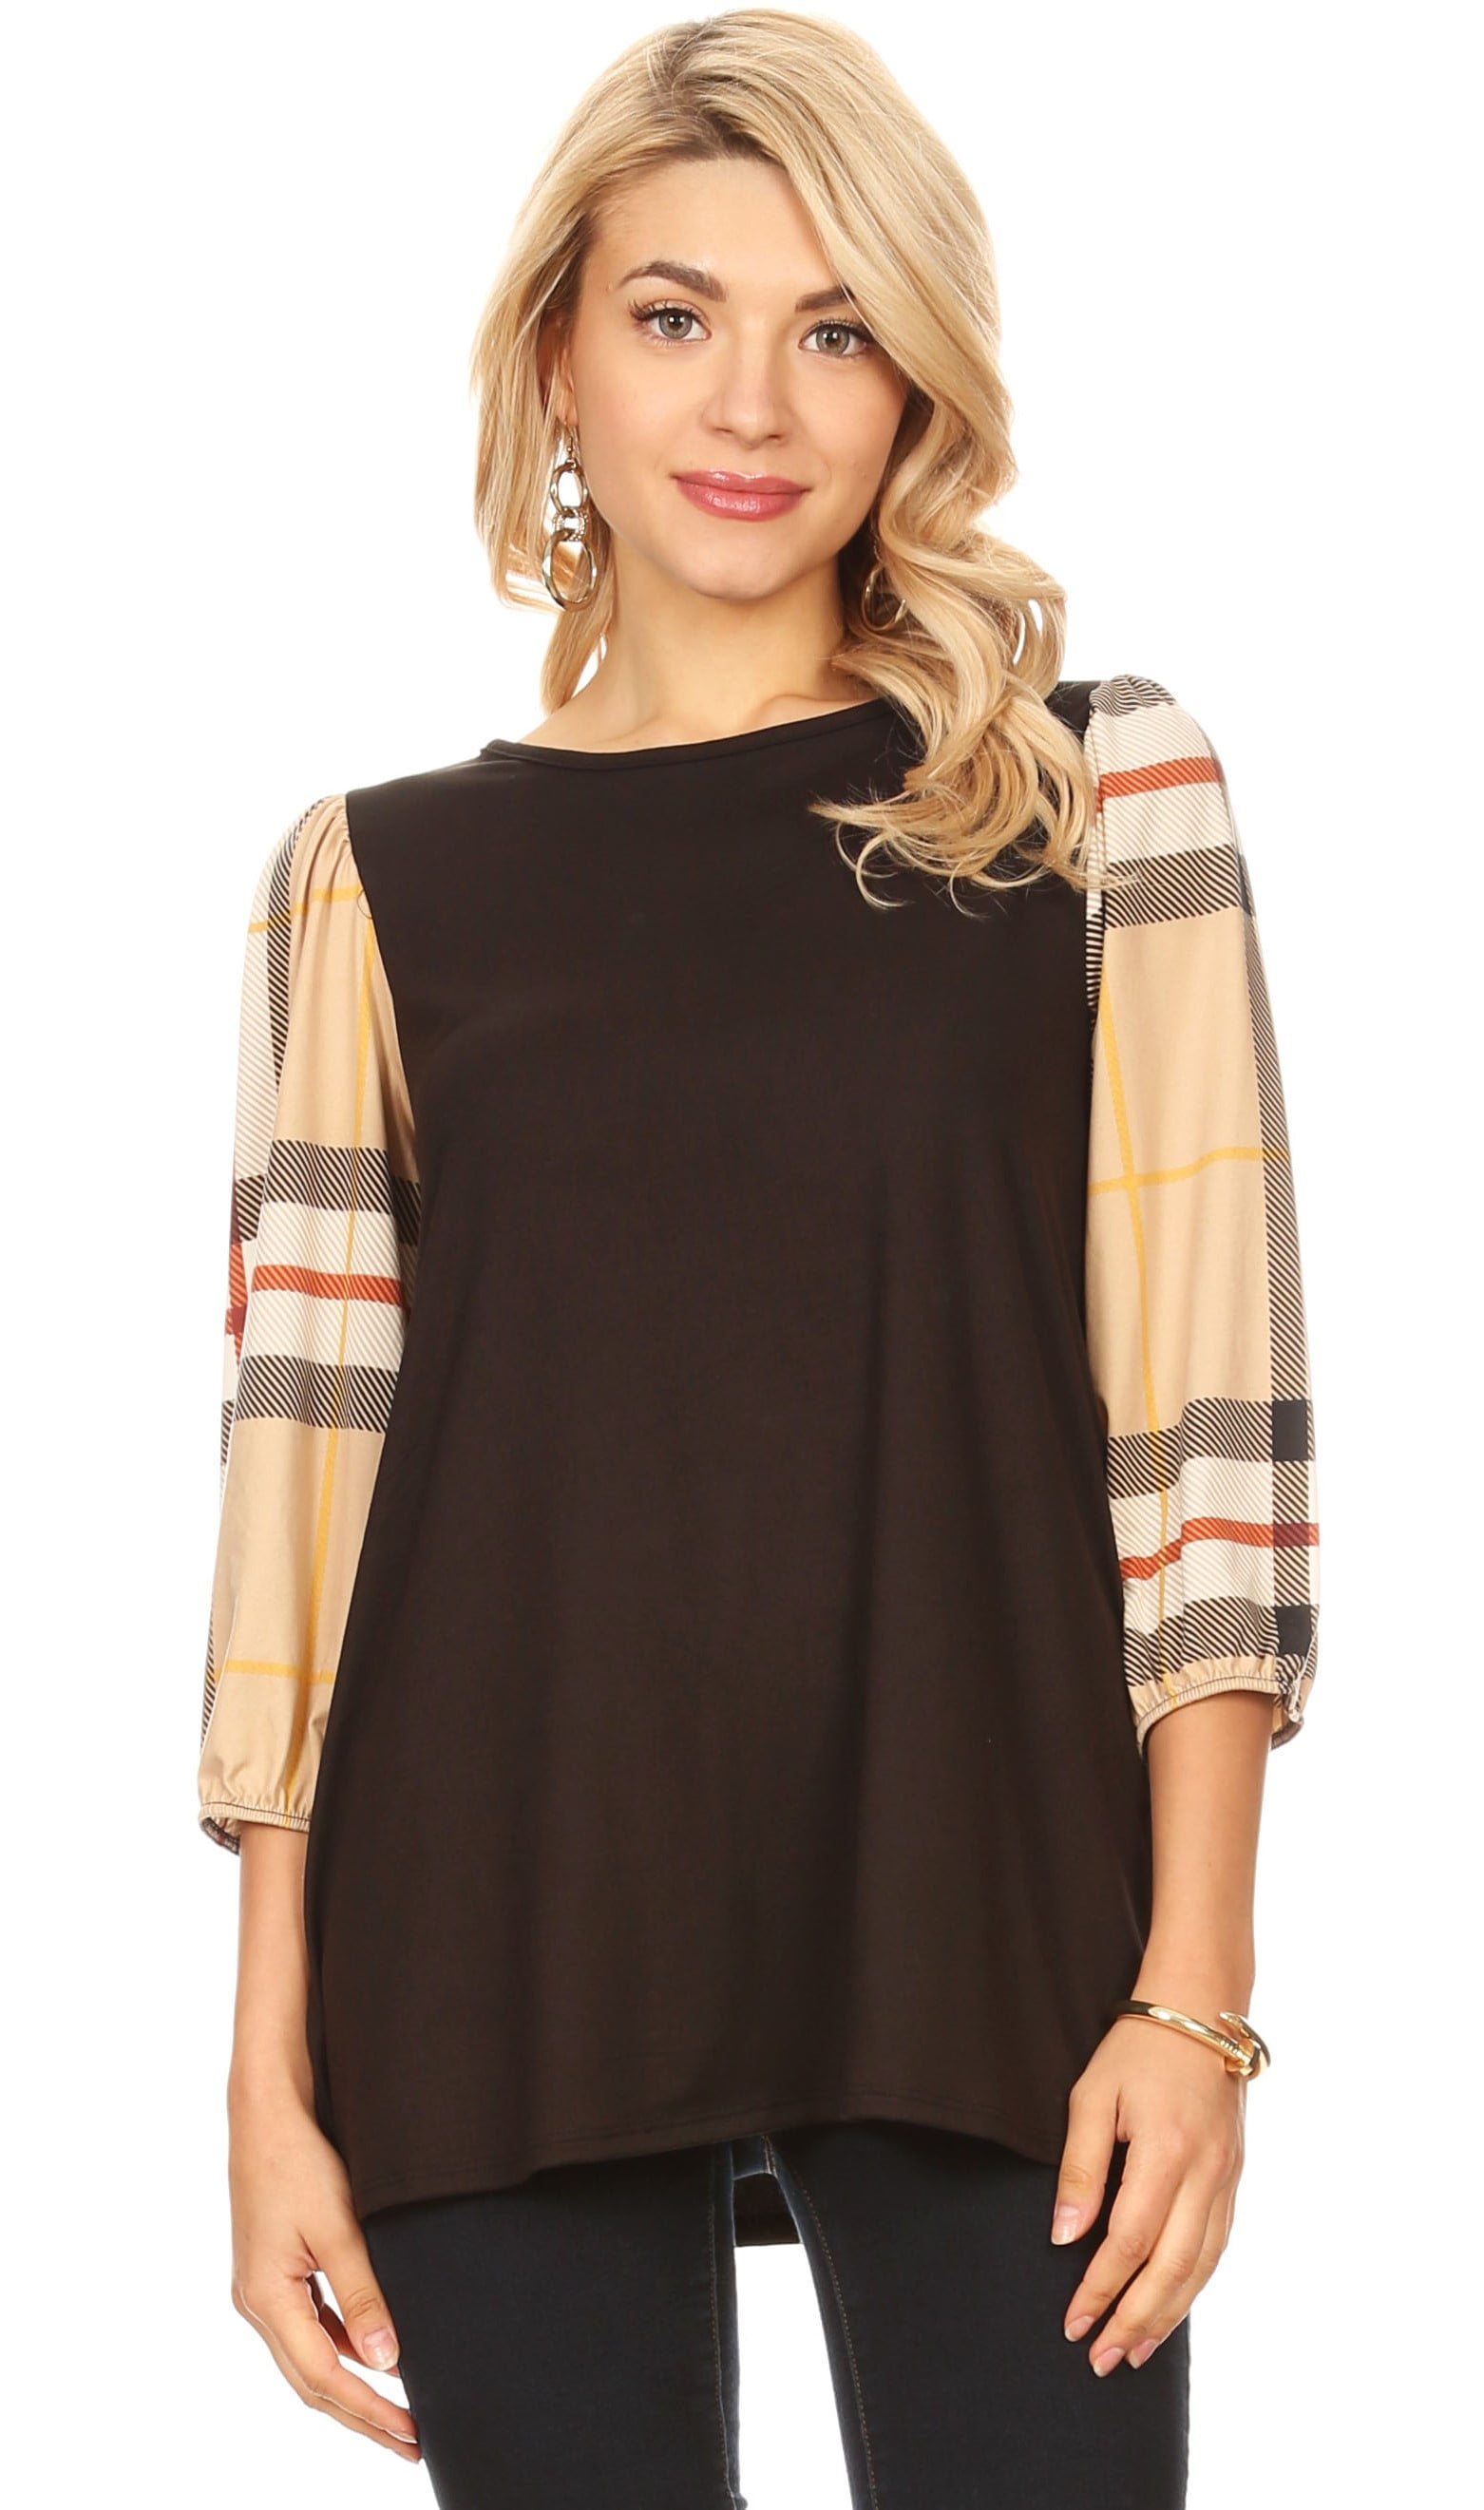 tunic tops for women with leggings